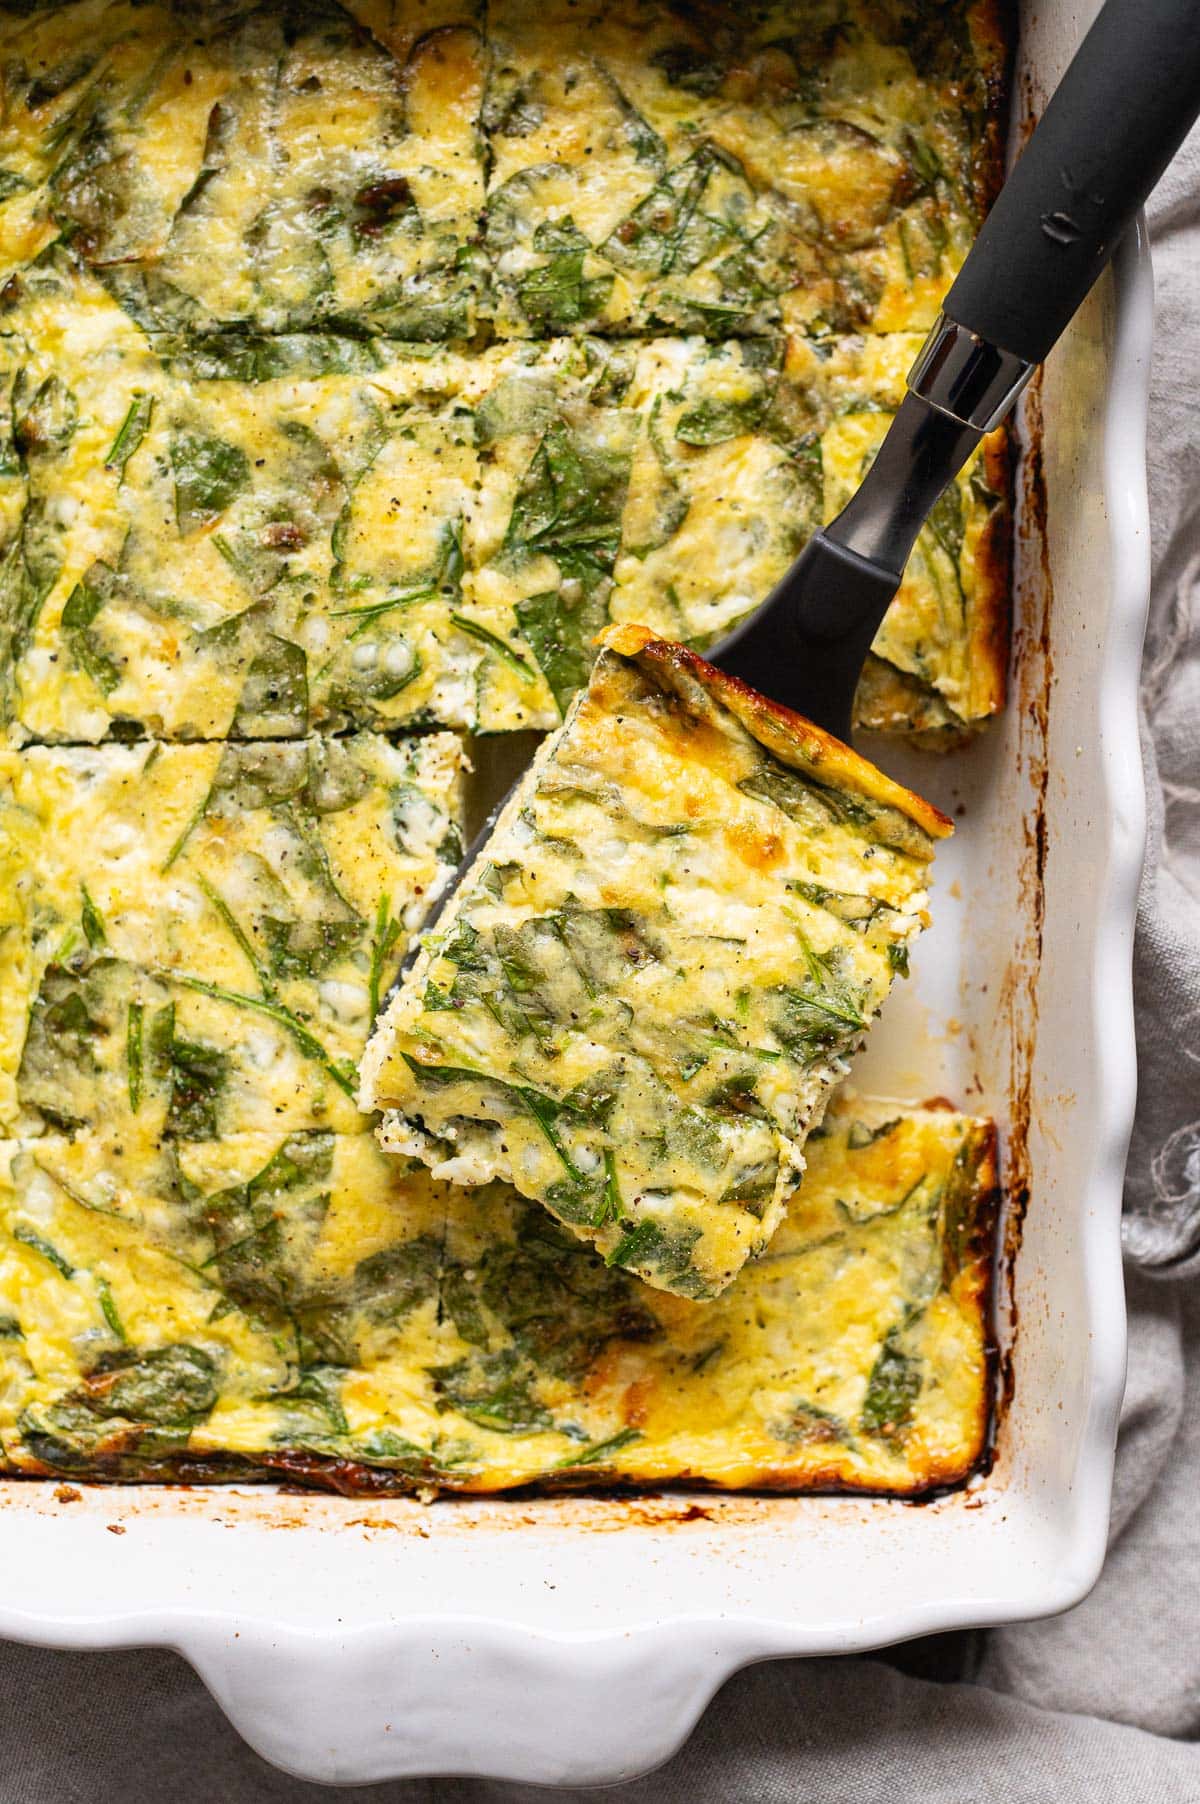 Slice of cottage cheese egg bake with spinach on a spatula.